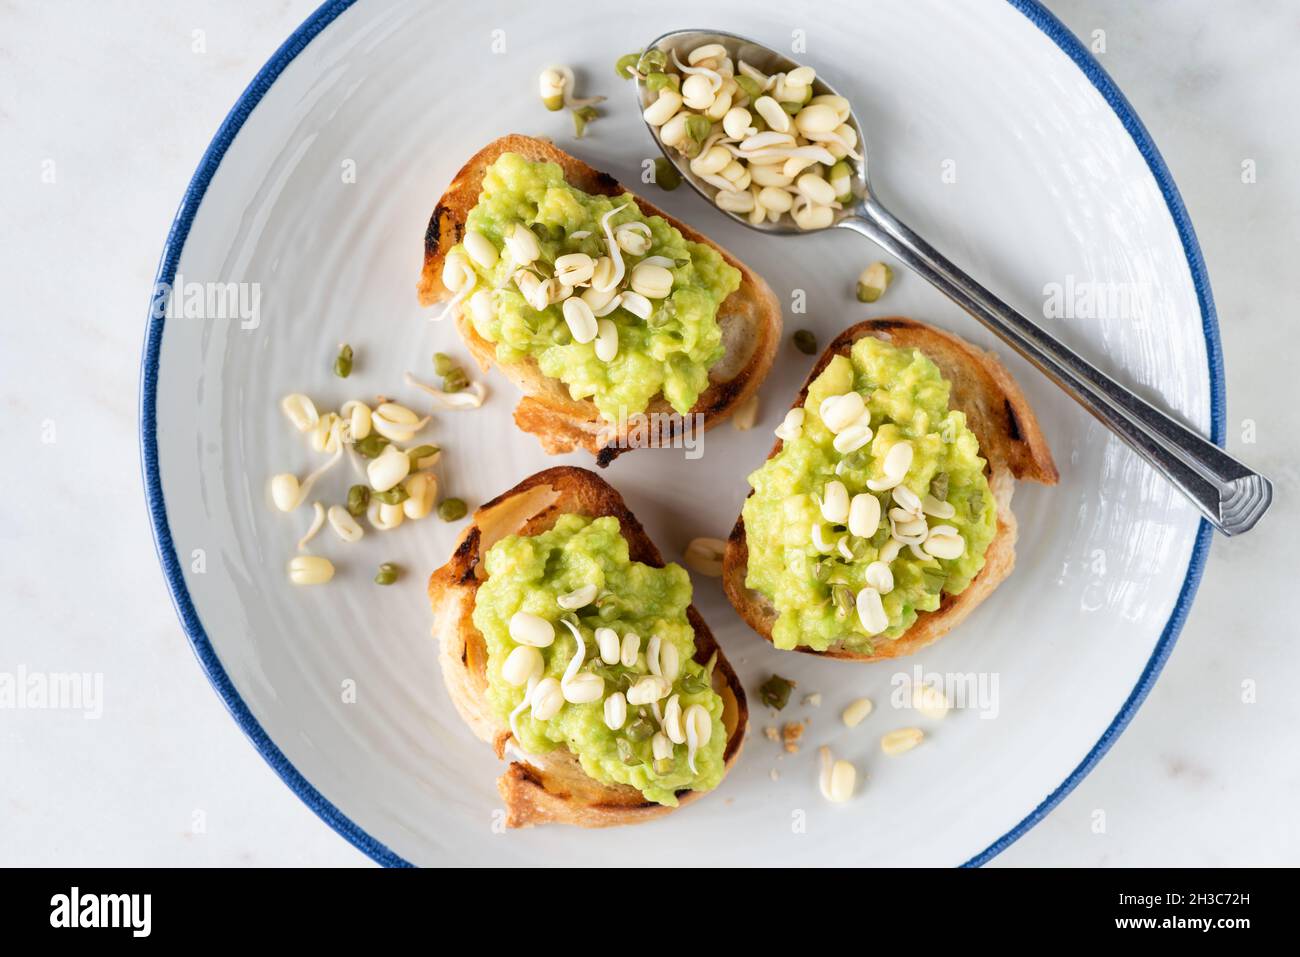 Vegan toasts with mashed avocado and mung bean sprouts on white plate, top view Stock Photo